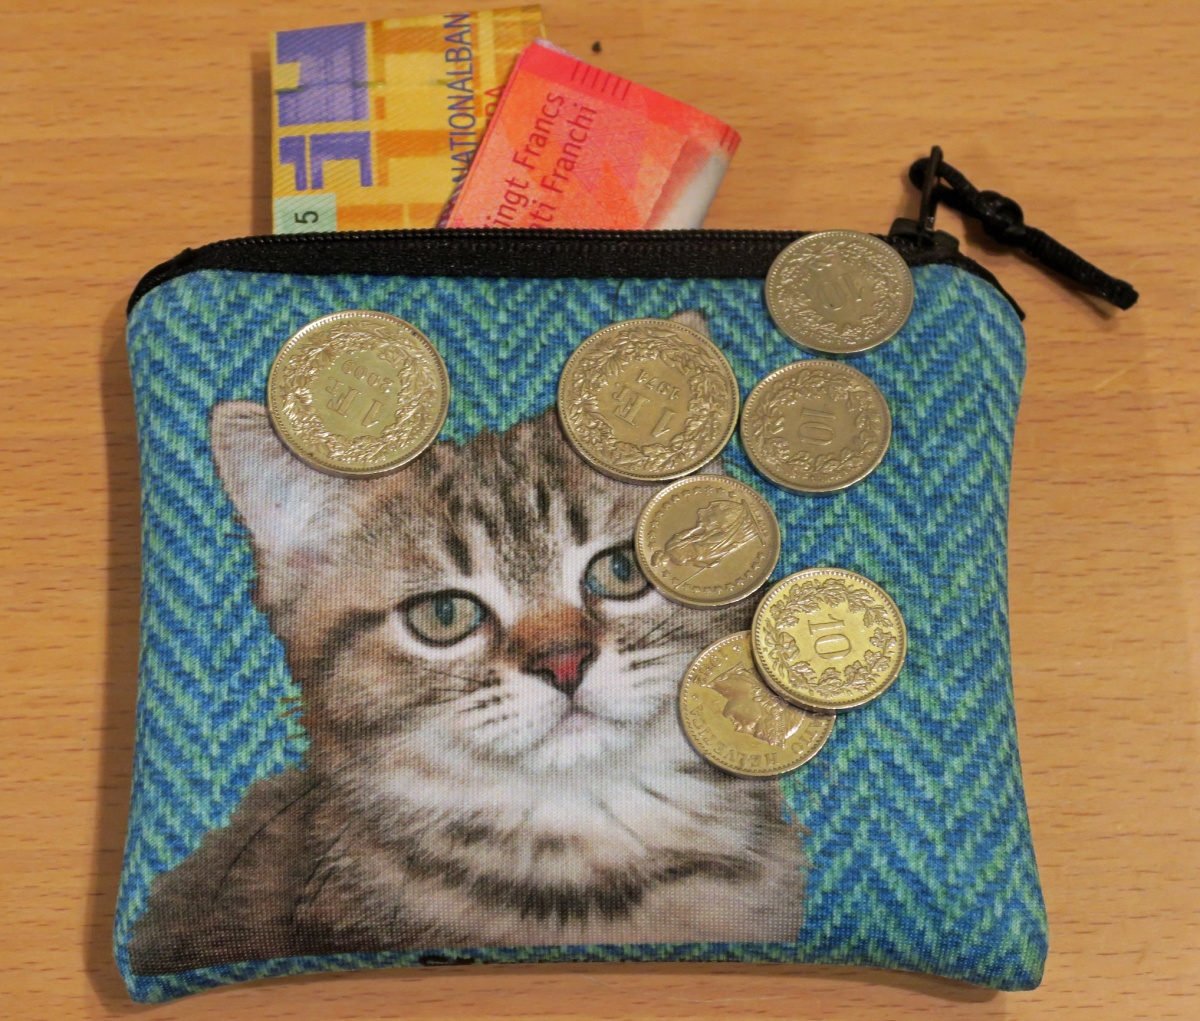 Size 'S' can be used as a coin purse